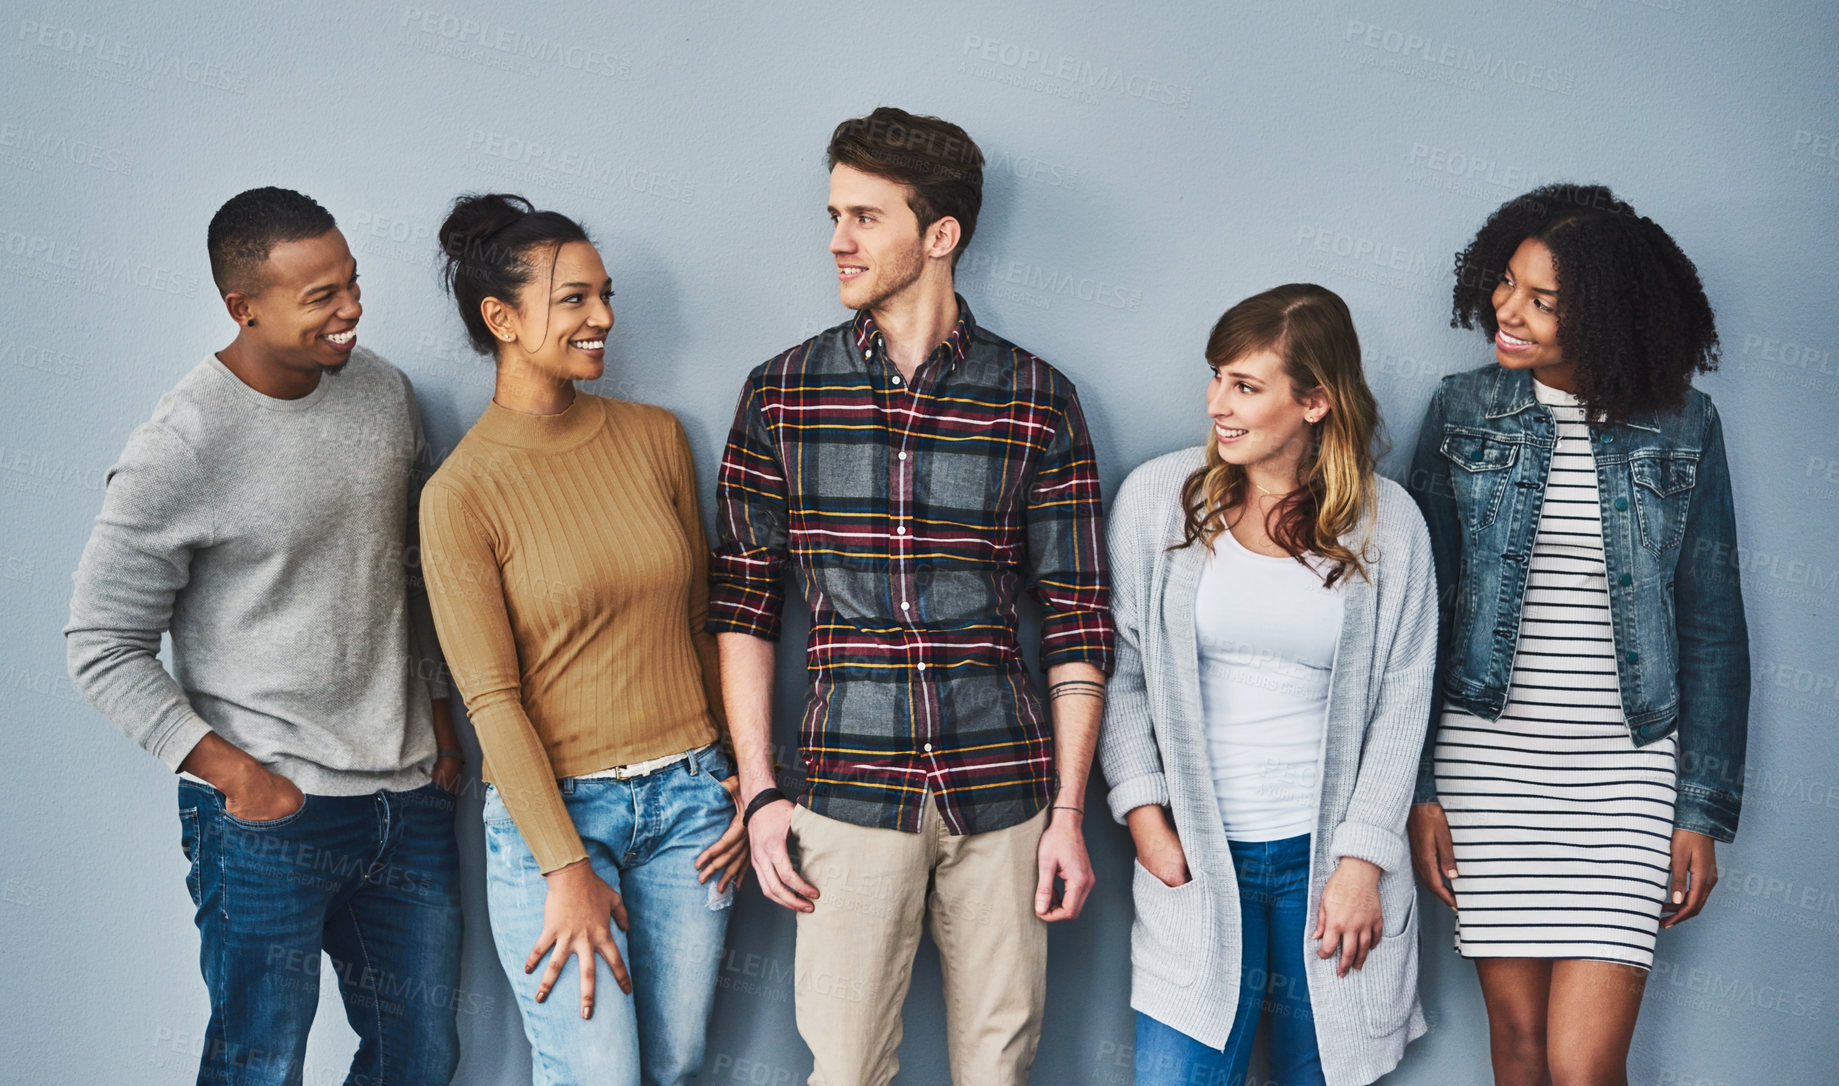 Buy stock photo Studio shot of a diverse group of young people standing together against a gray background